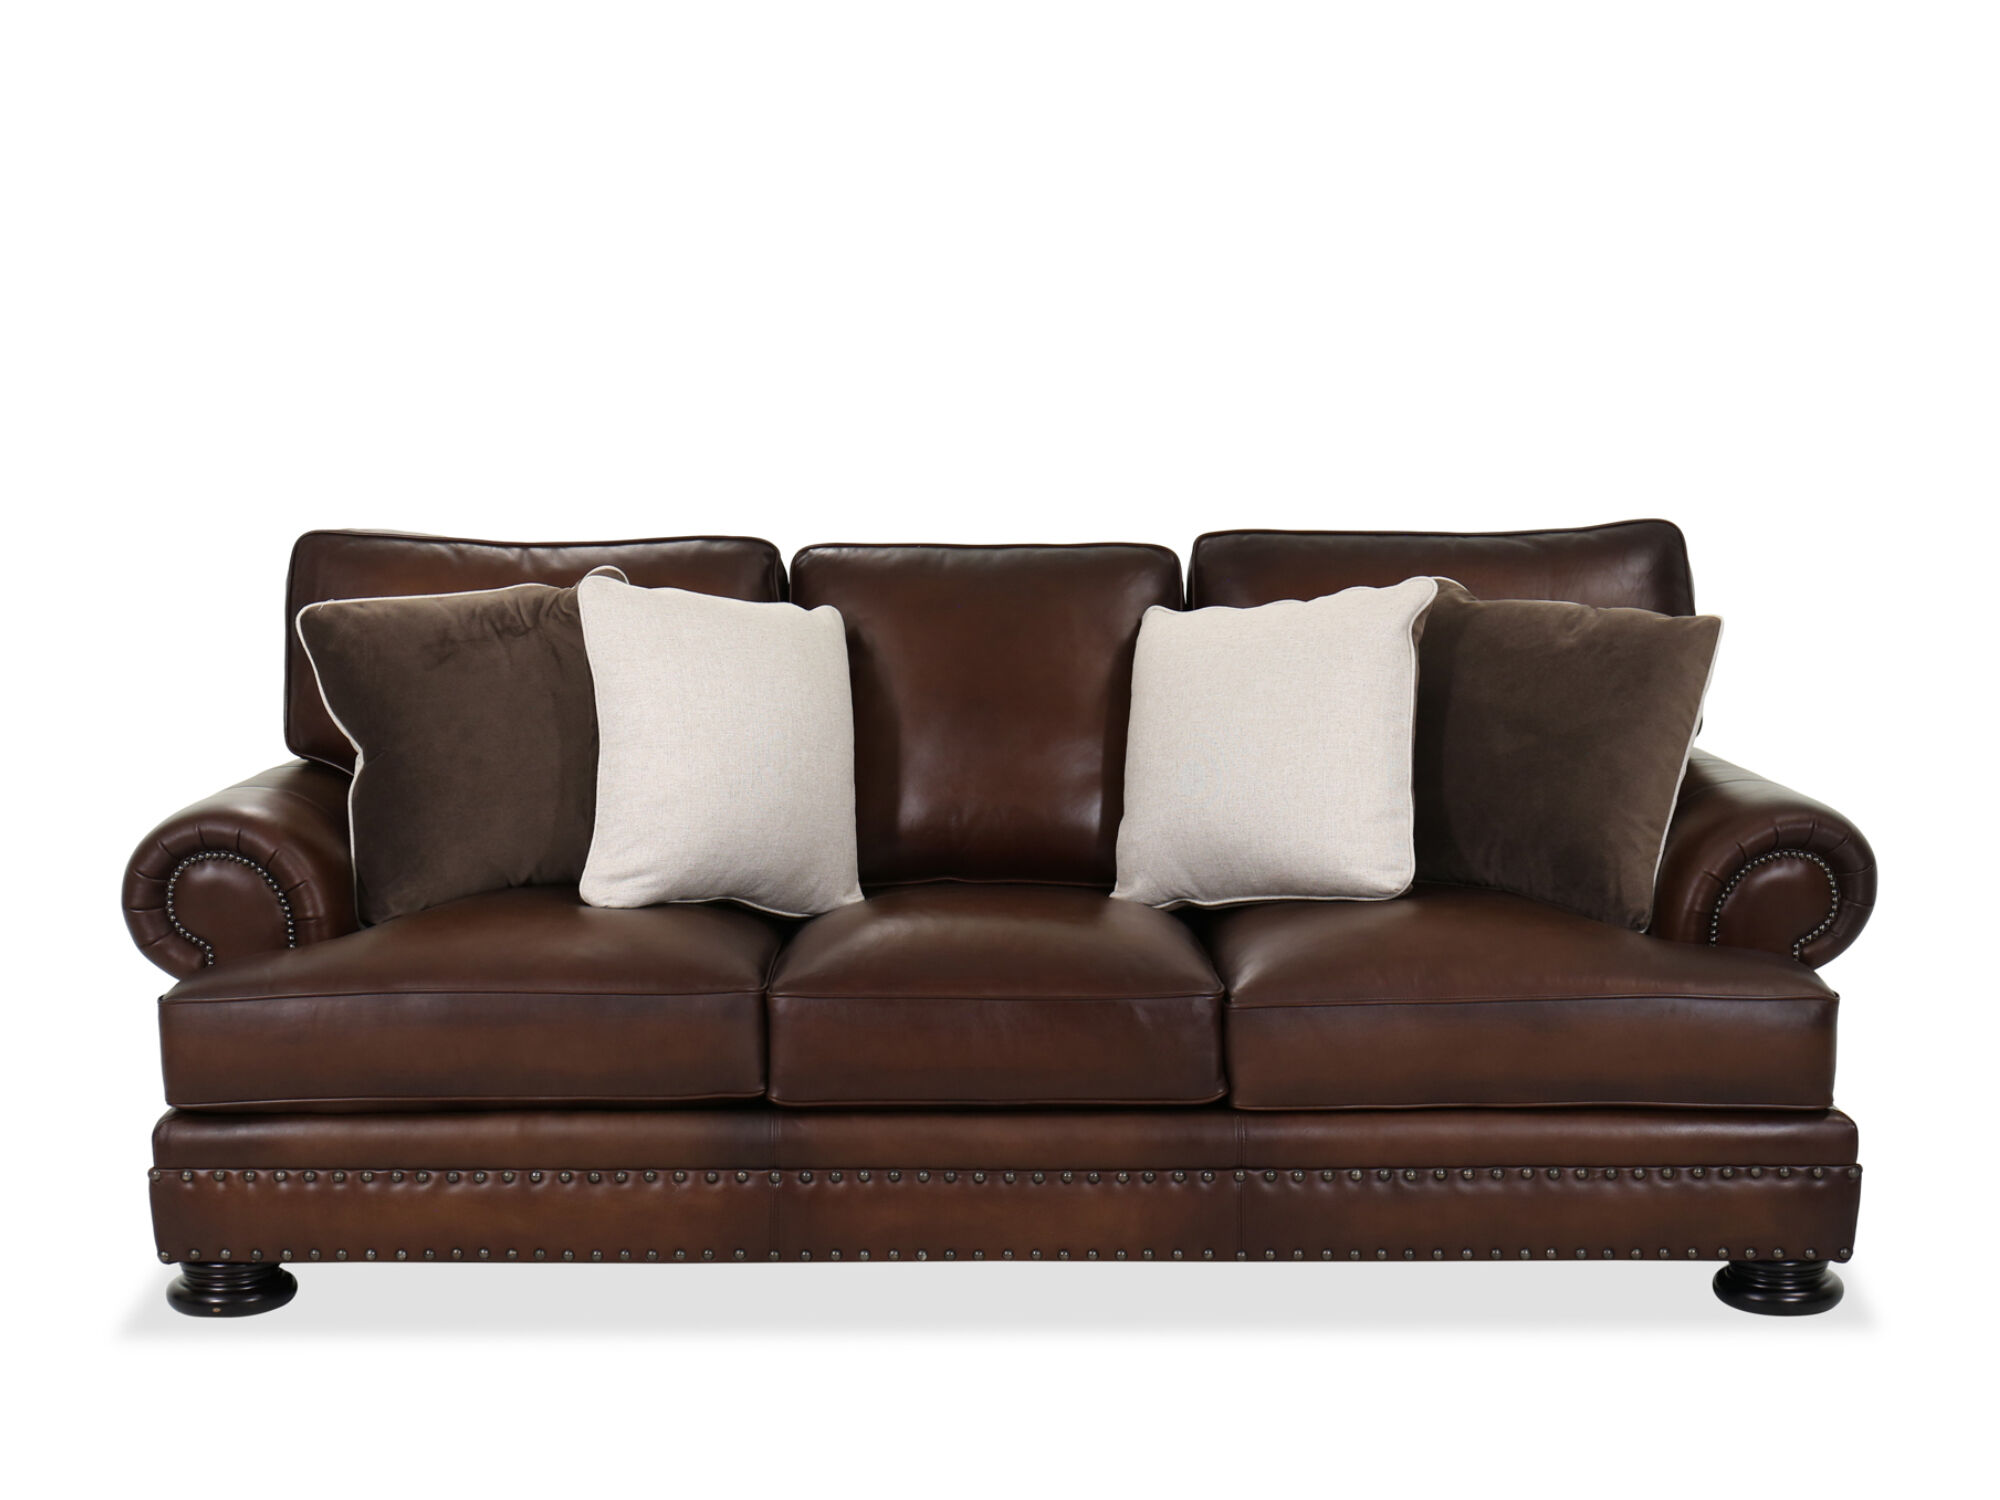 Leather 98 Sofa In Brown Mathis, Bernhardt Leather Furniture